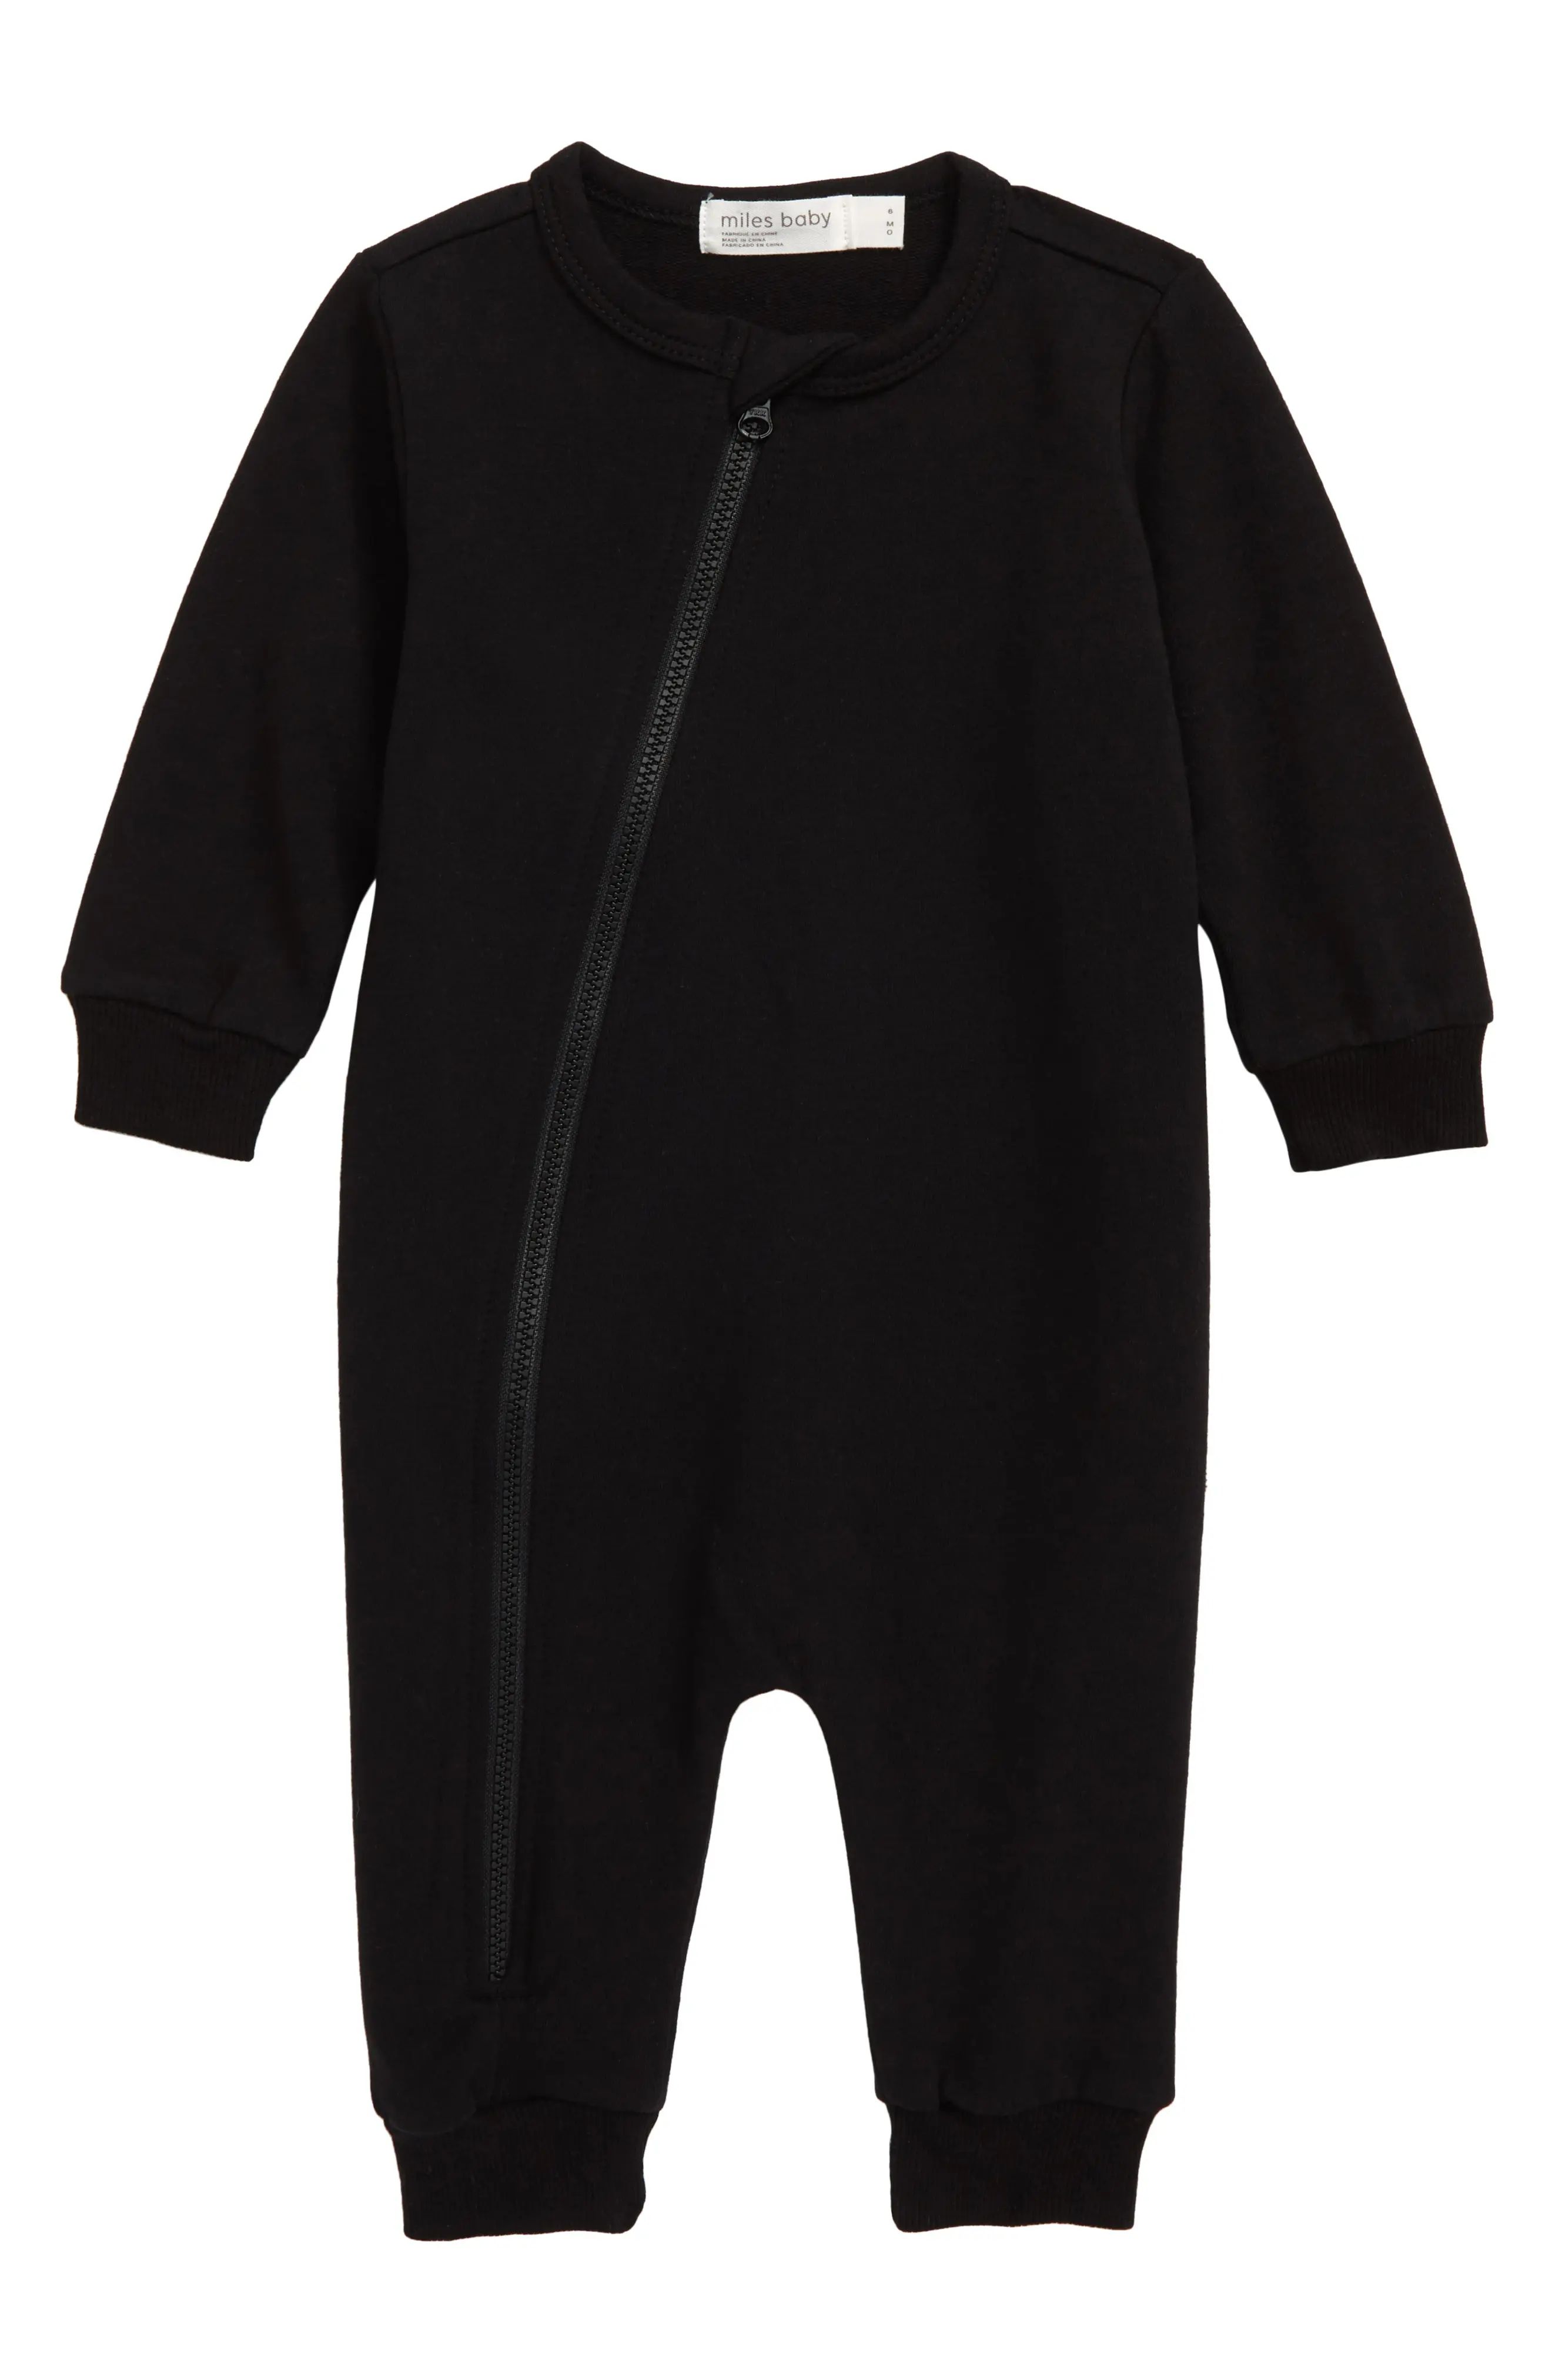 MILES THE LABEL miles baby Asymmetrical Zip Romper in Black at Nordstrom, Size 9M | Nordstrom